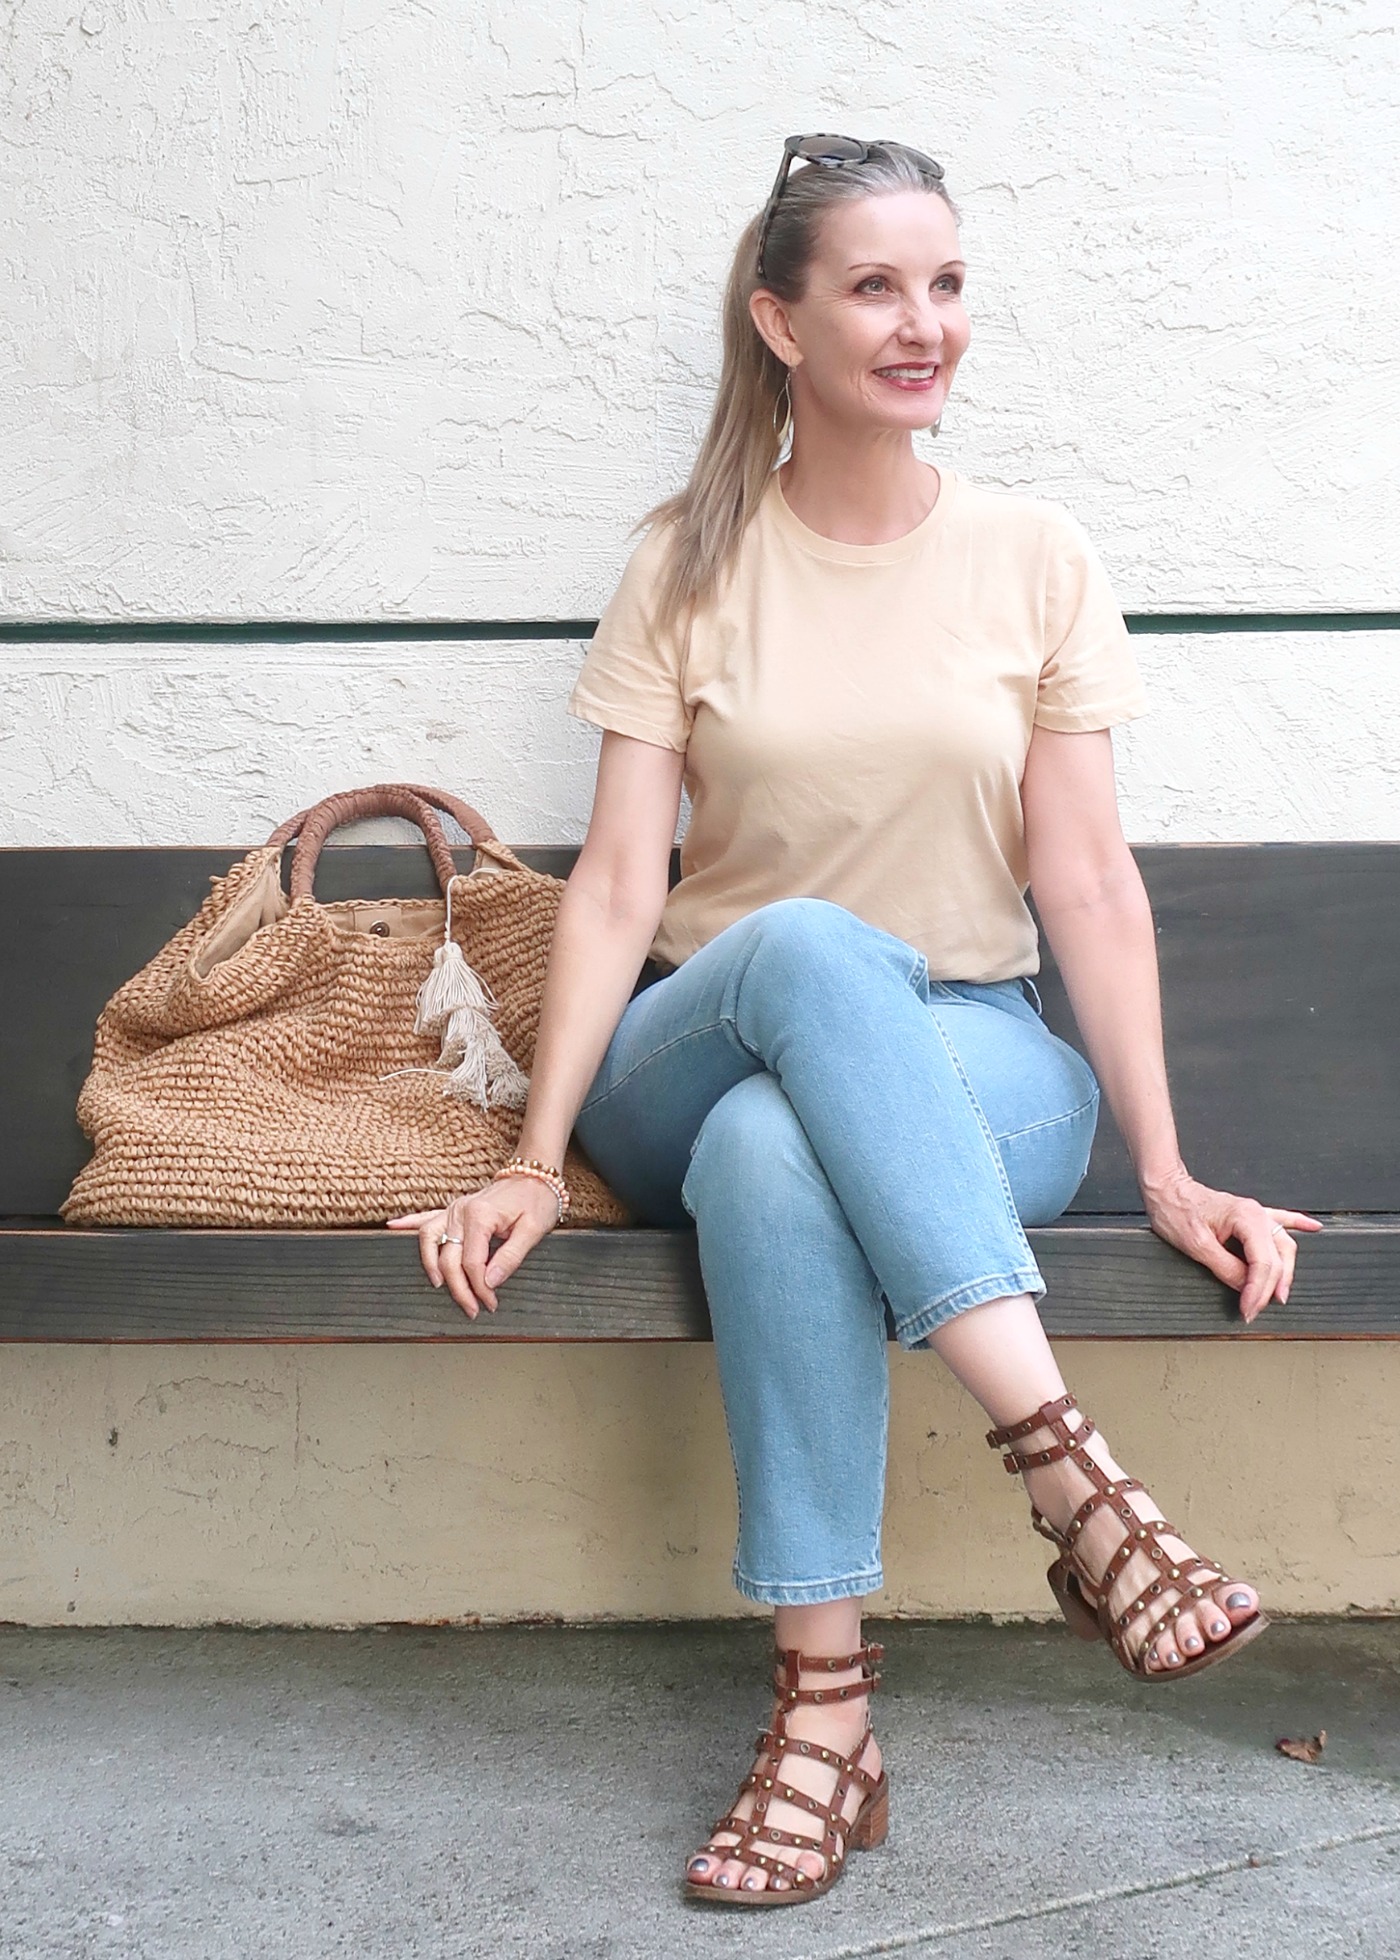 Everlane's Cotton Crew tee and Curvy Cheeky Jeans